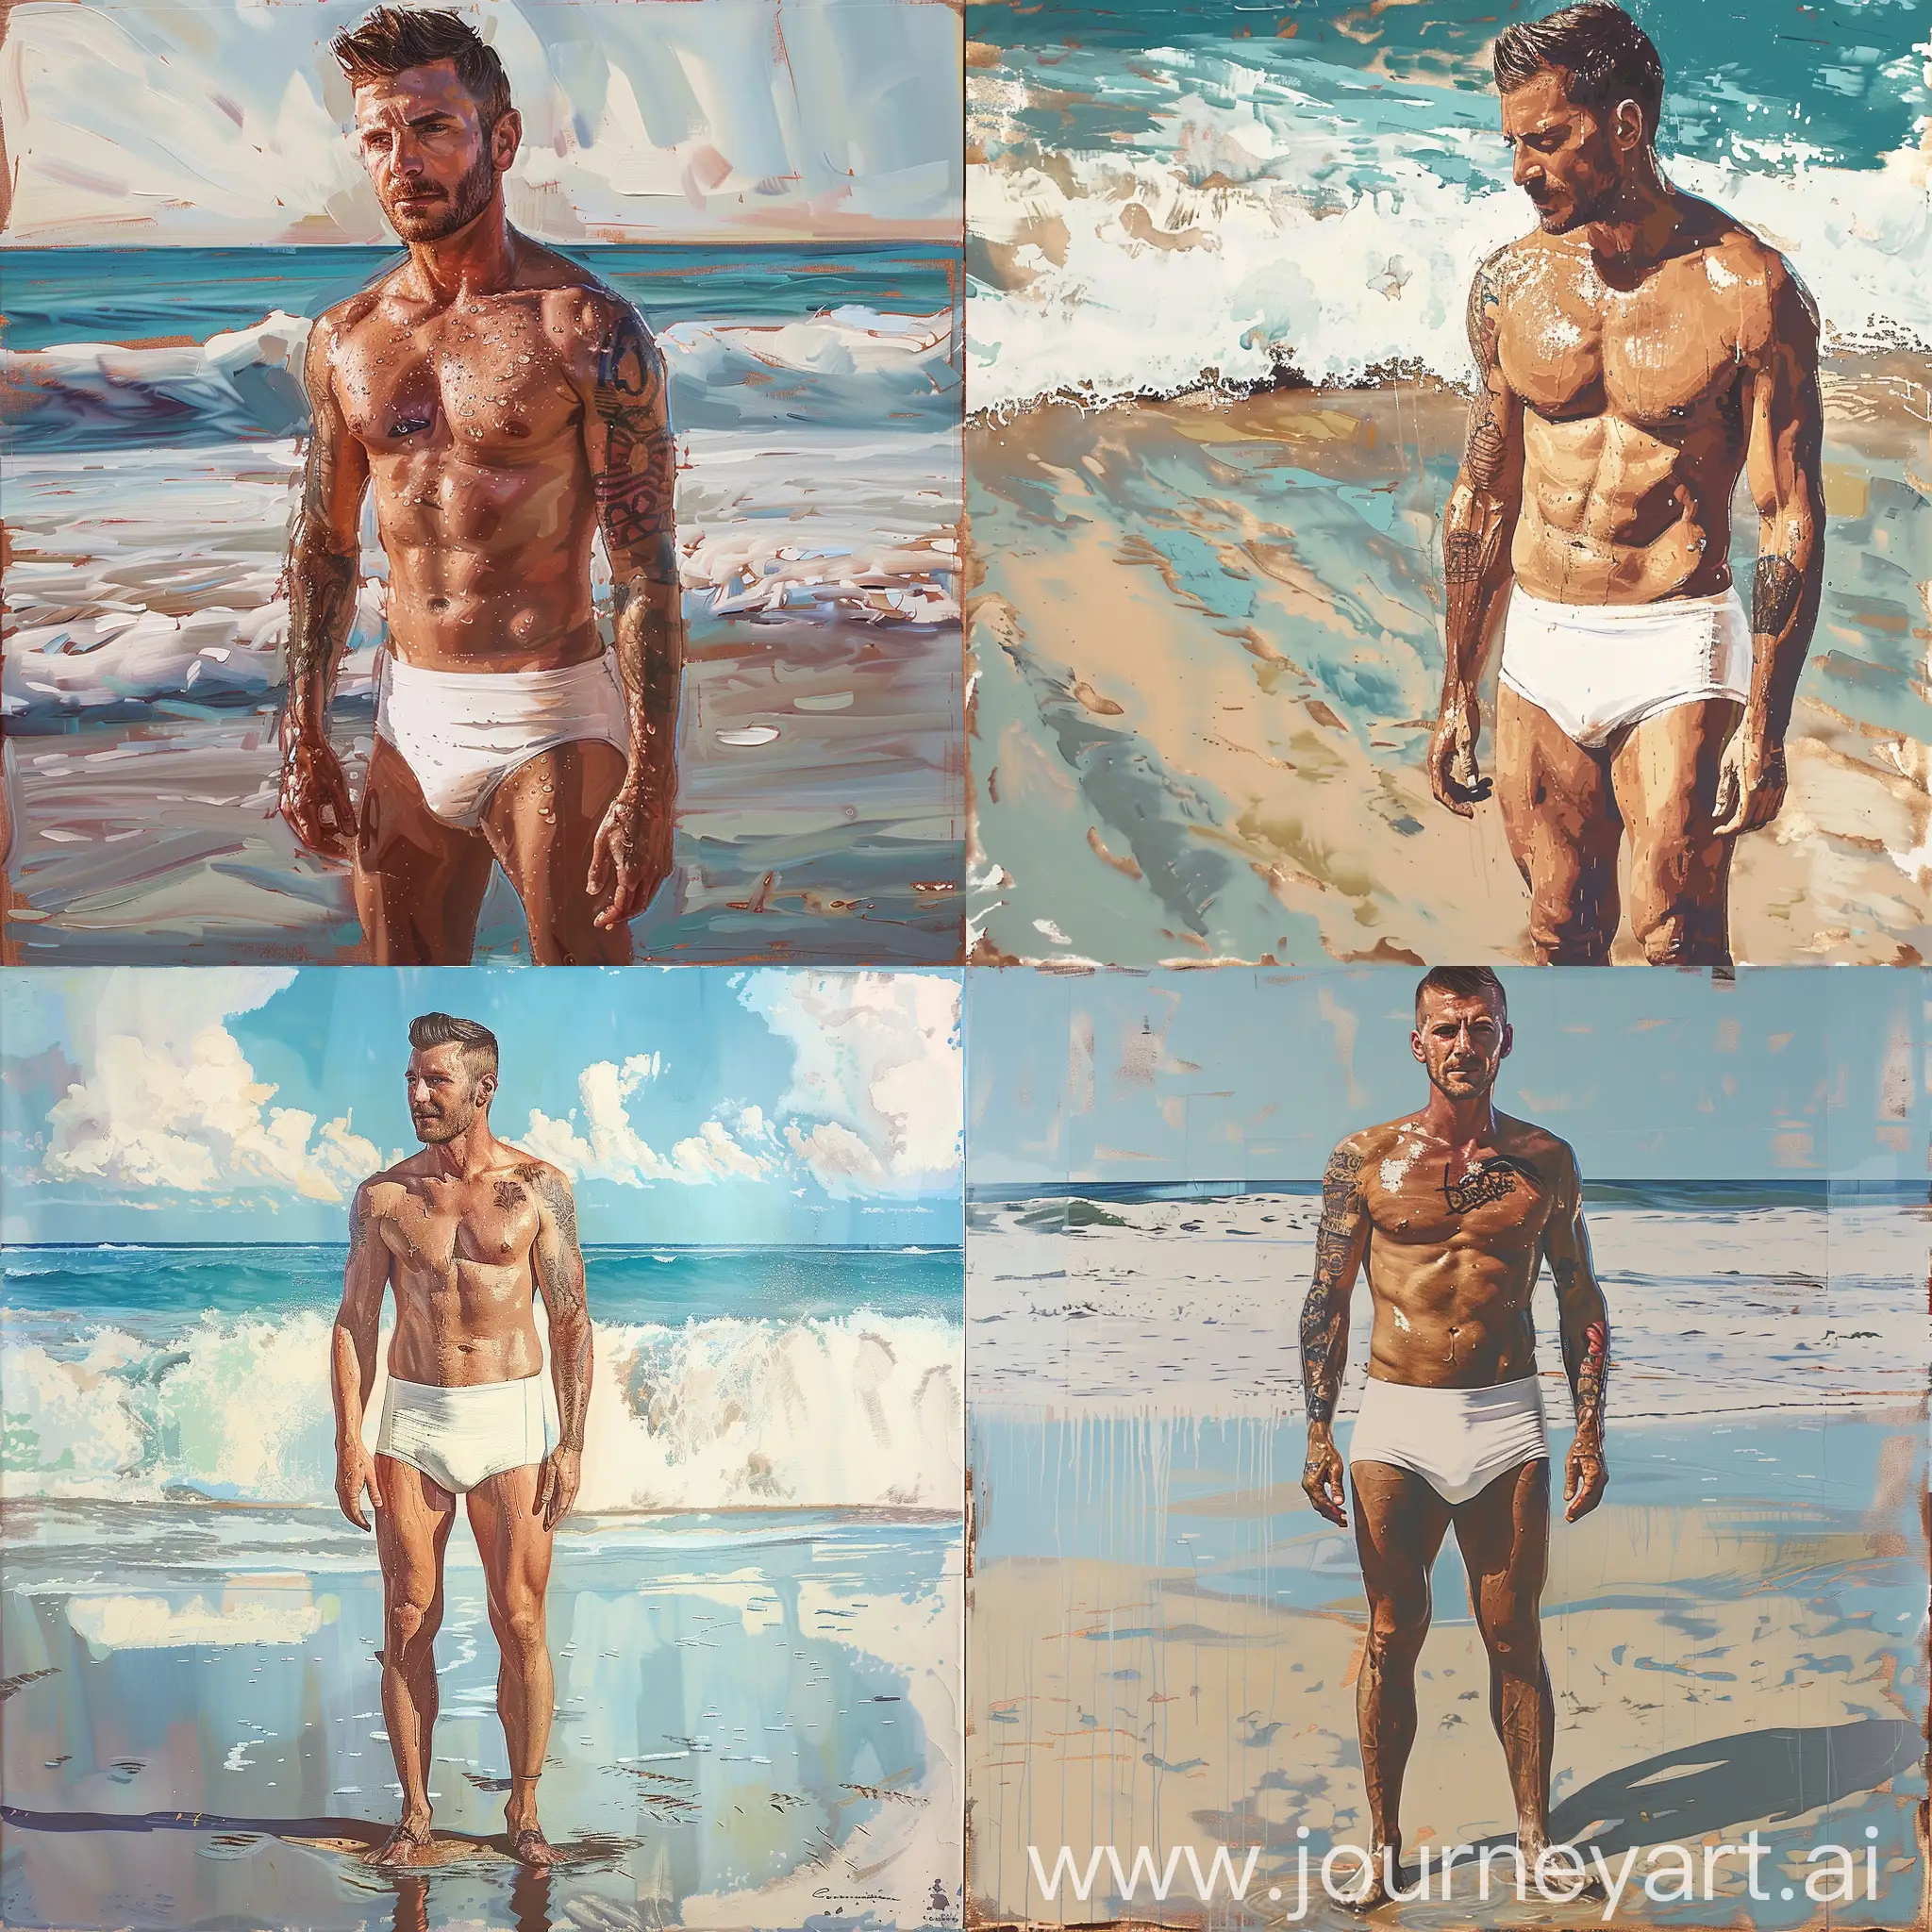 David Beckham stands in white short tight wet speedo on the beach, a painting in the style of the artist Andy Warhol